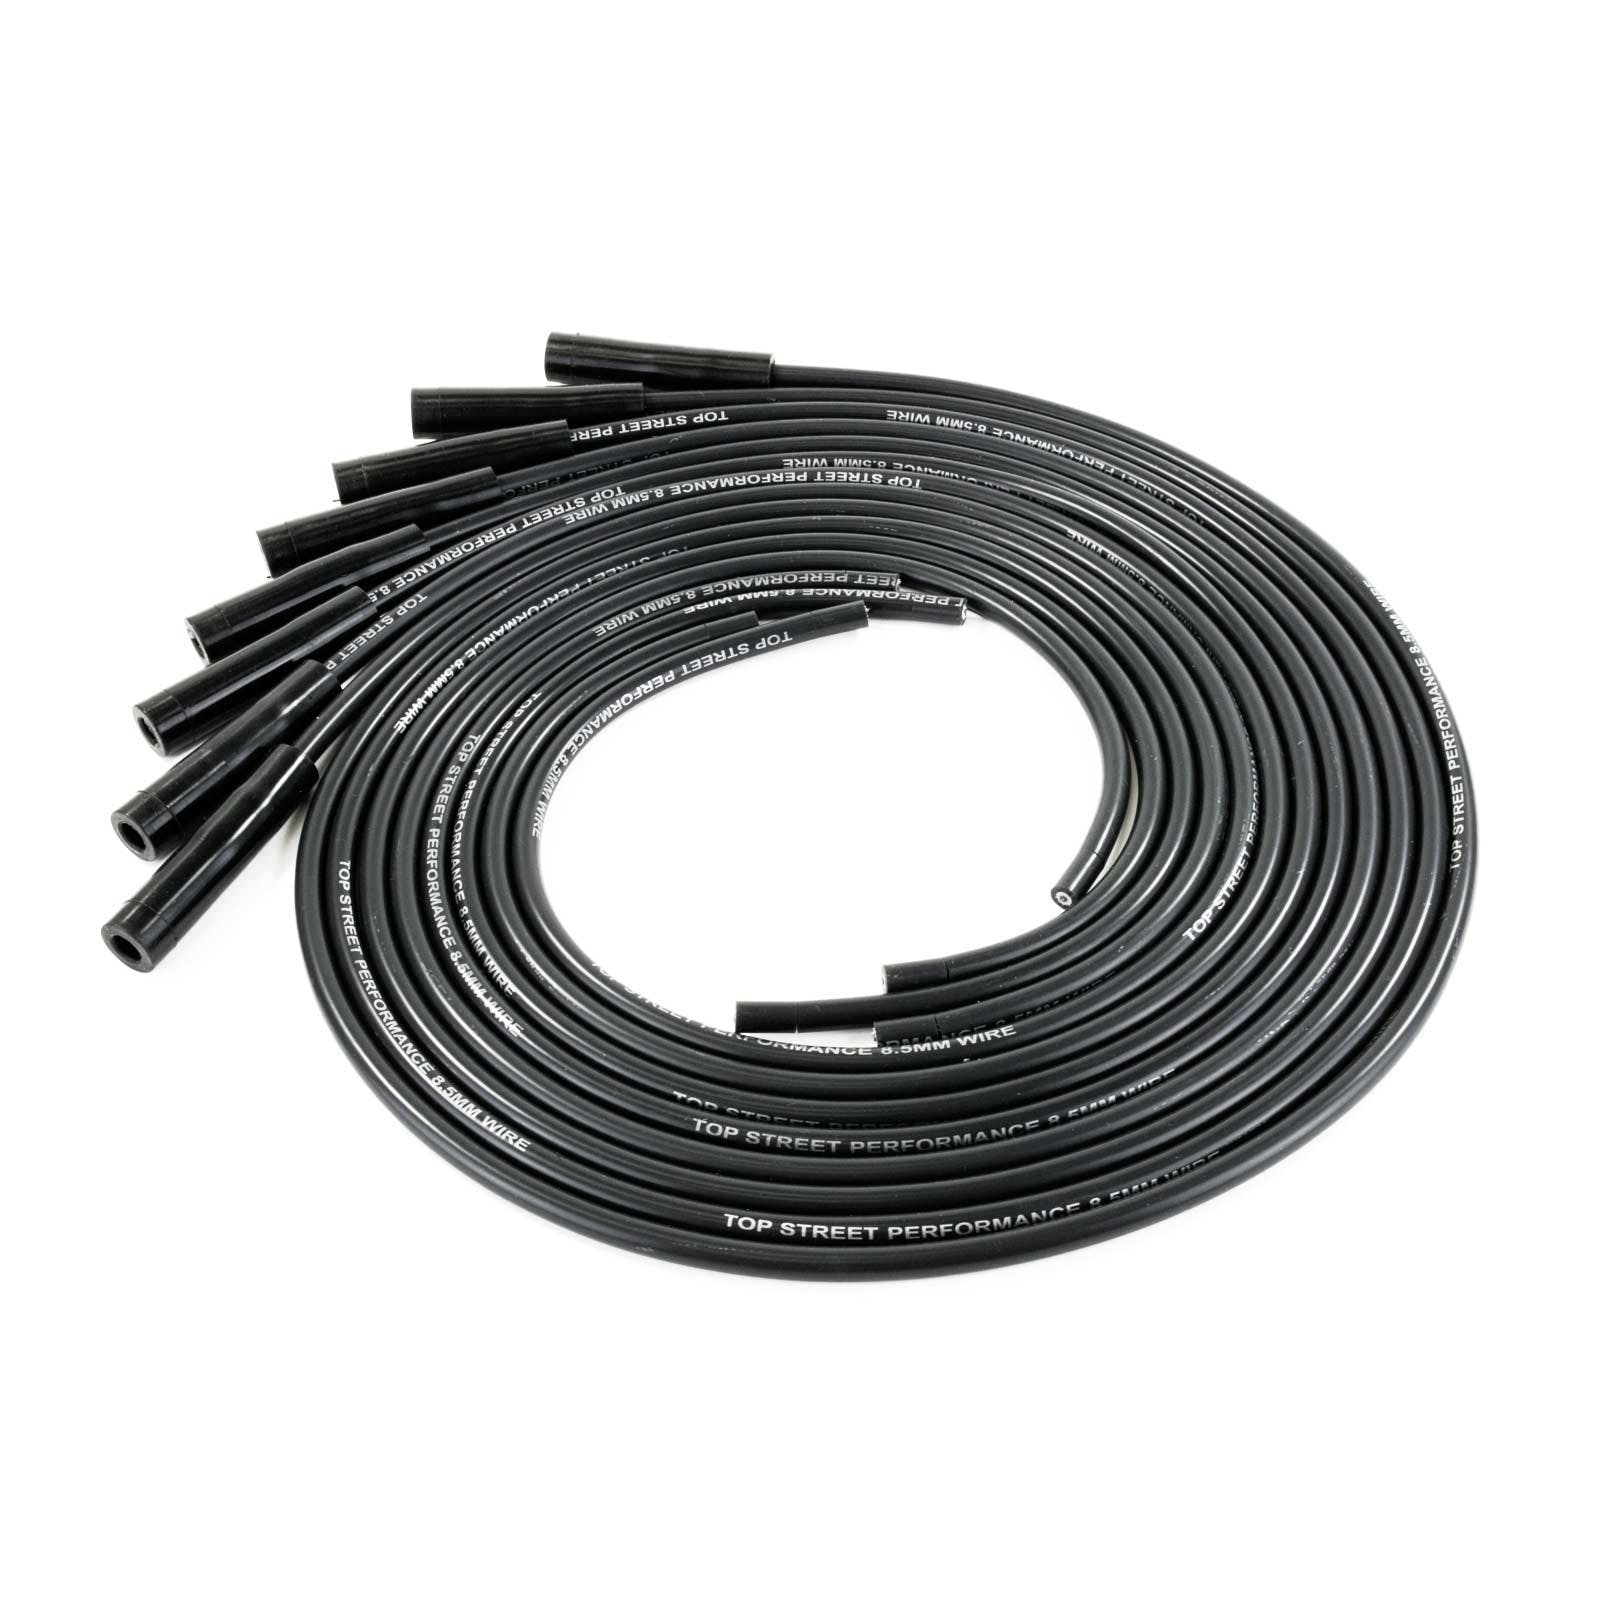 Top Street Performance 85080 Spark Plug Wire Set, Universal Fit 8.5mm with 180 degree Plug Boots, Black